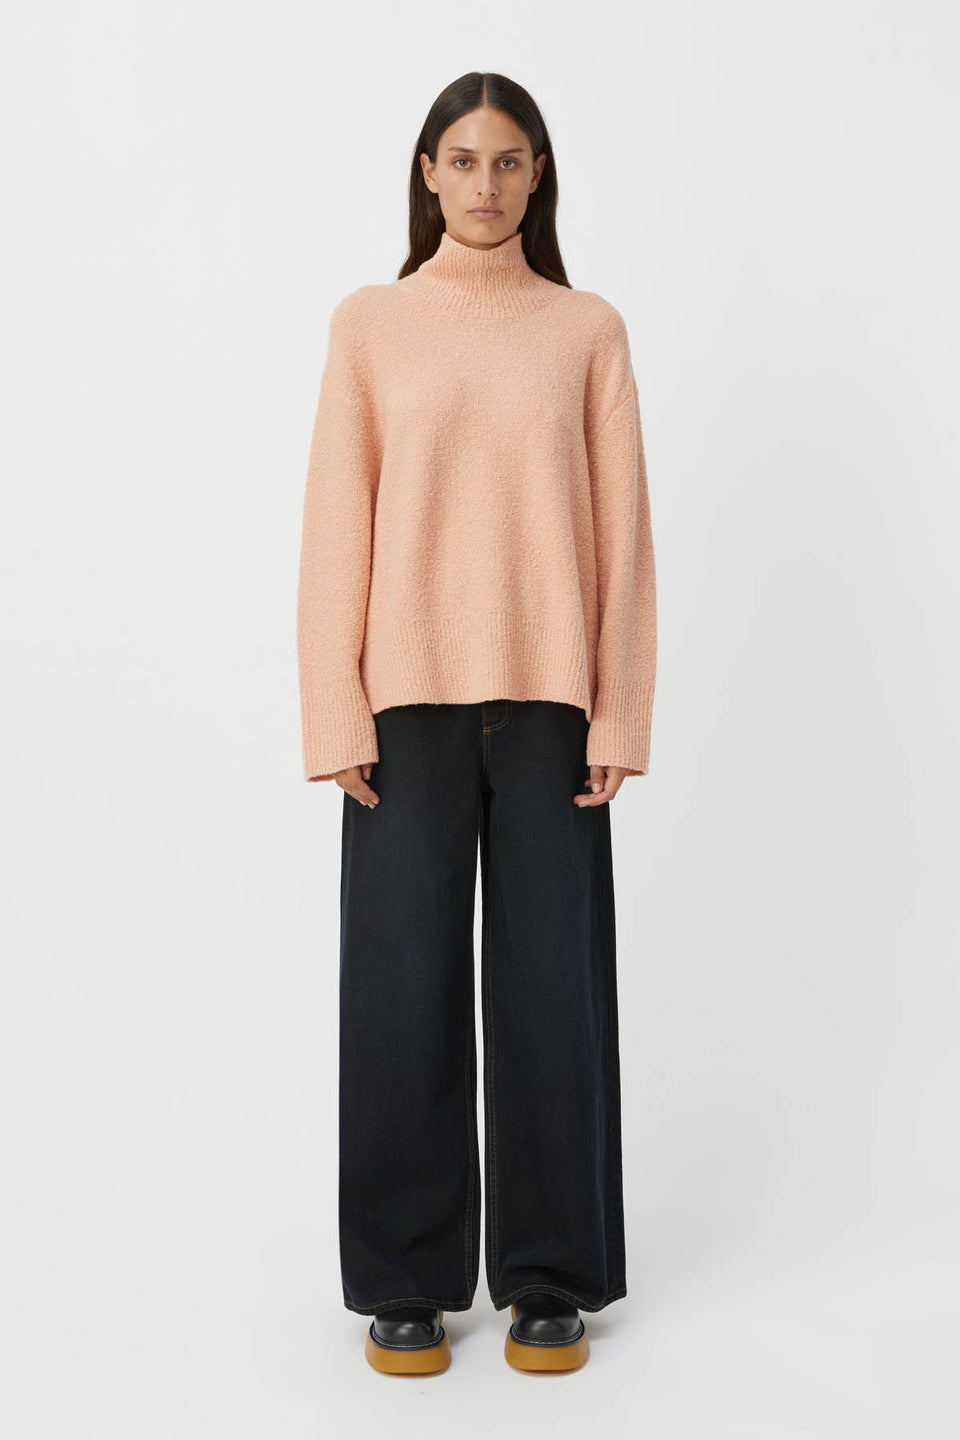 Women's Knitwear | Jumpers, Sweats & More | CAMILLA AND MARC